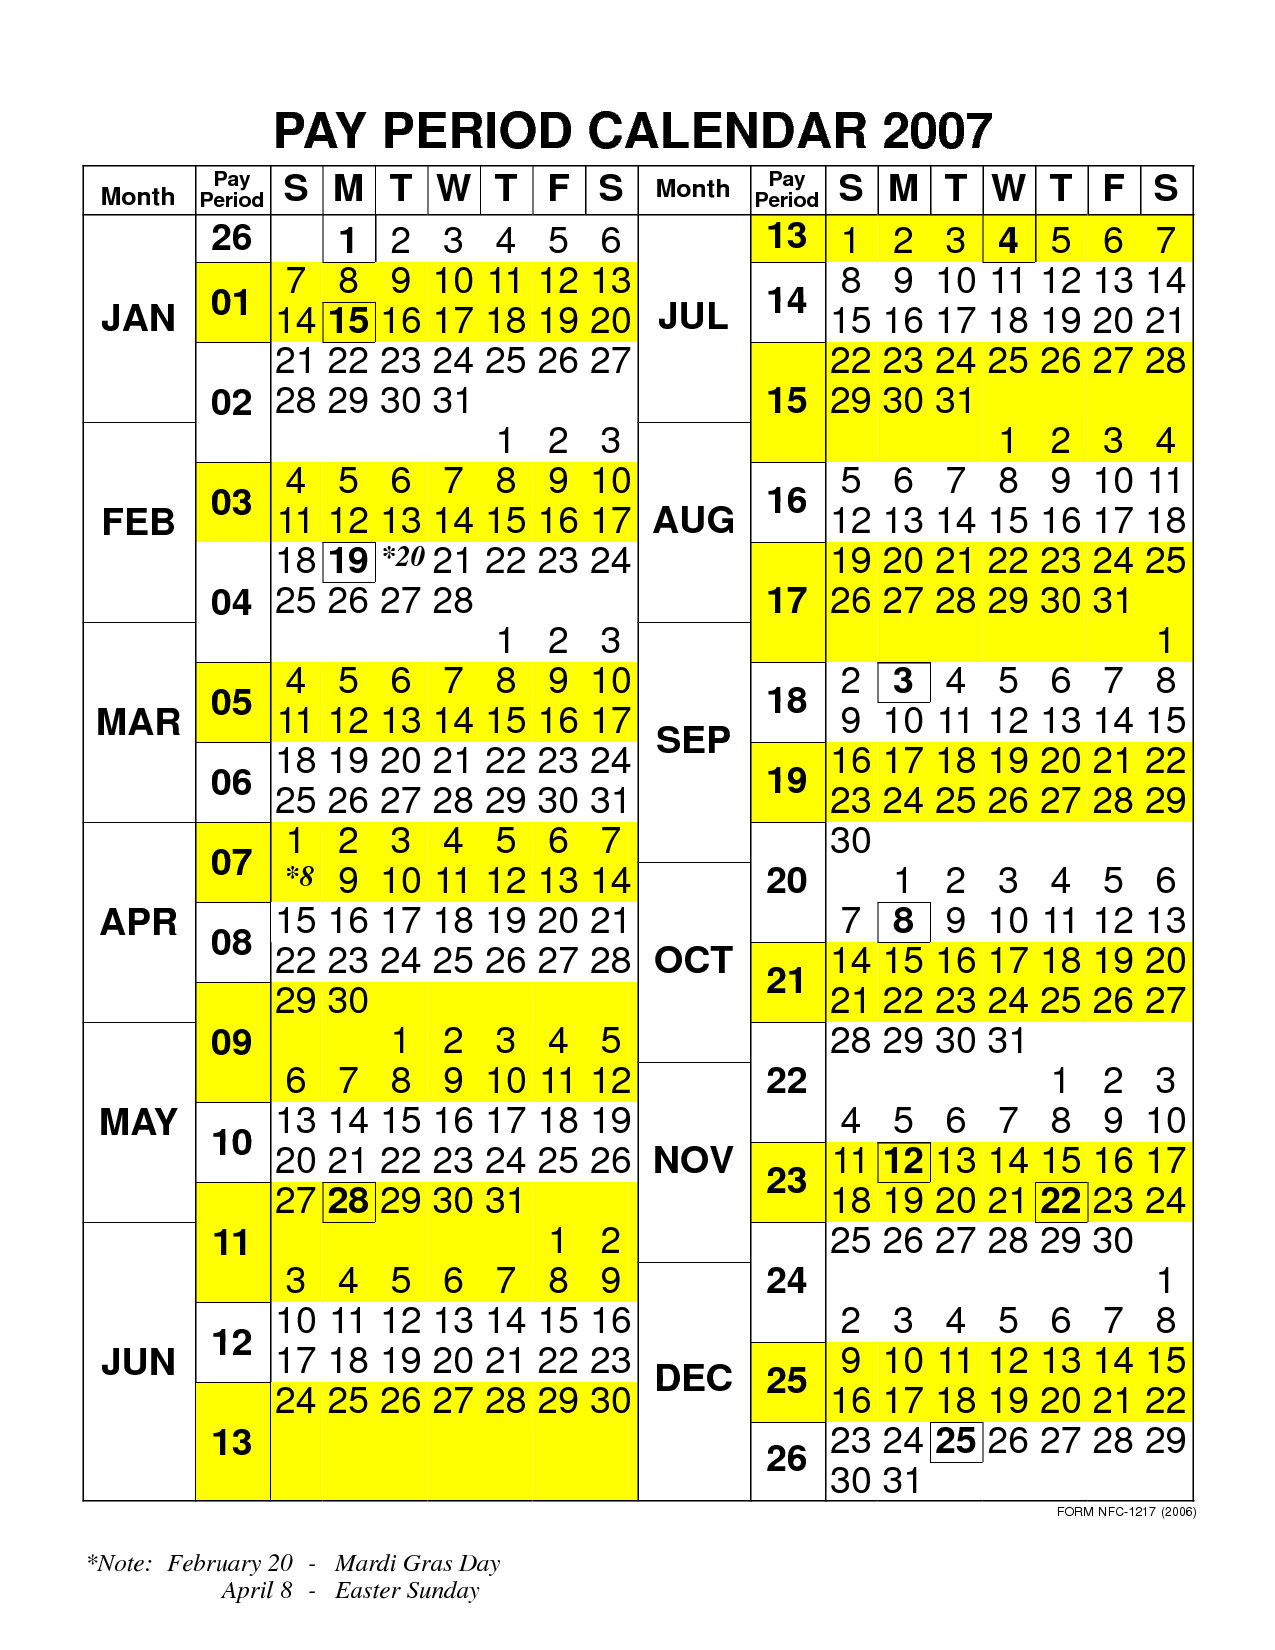 federal-pay-period-calendar-2021-your-pay-how-many-payperiods-left